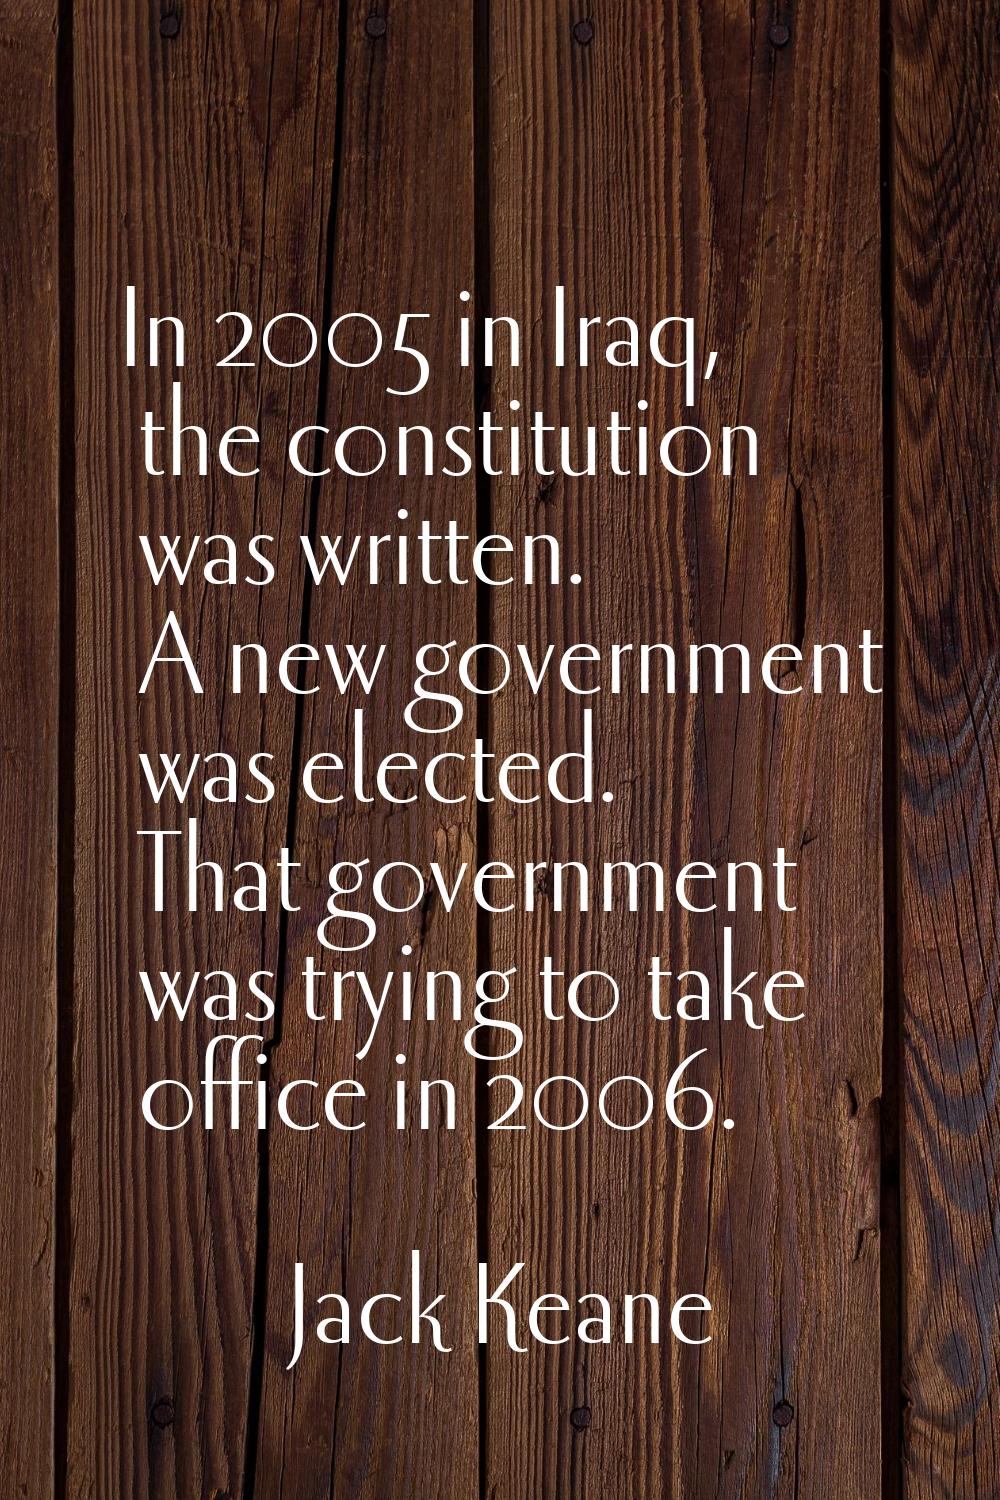 In 2005 in Iraq, the constitution was written. A new government was elected. That government was tr